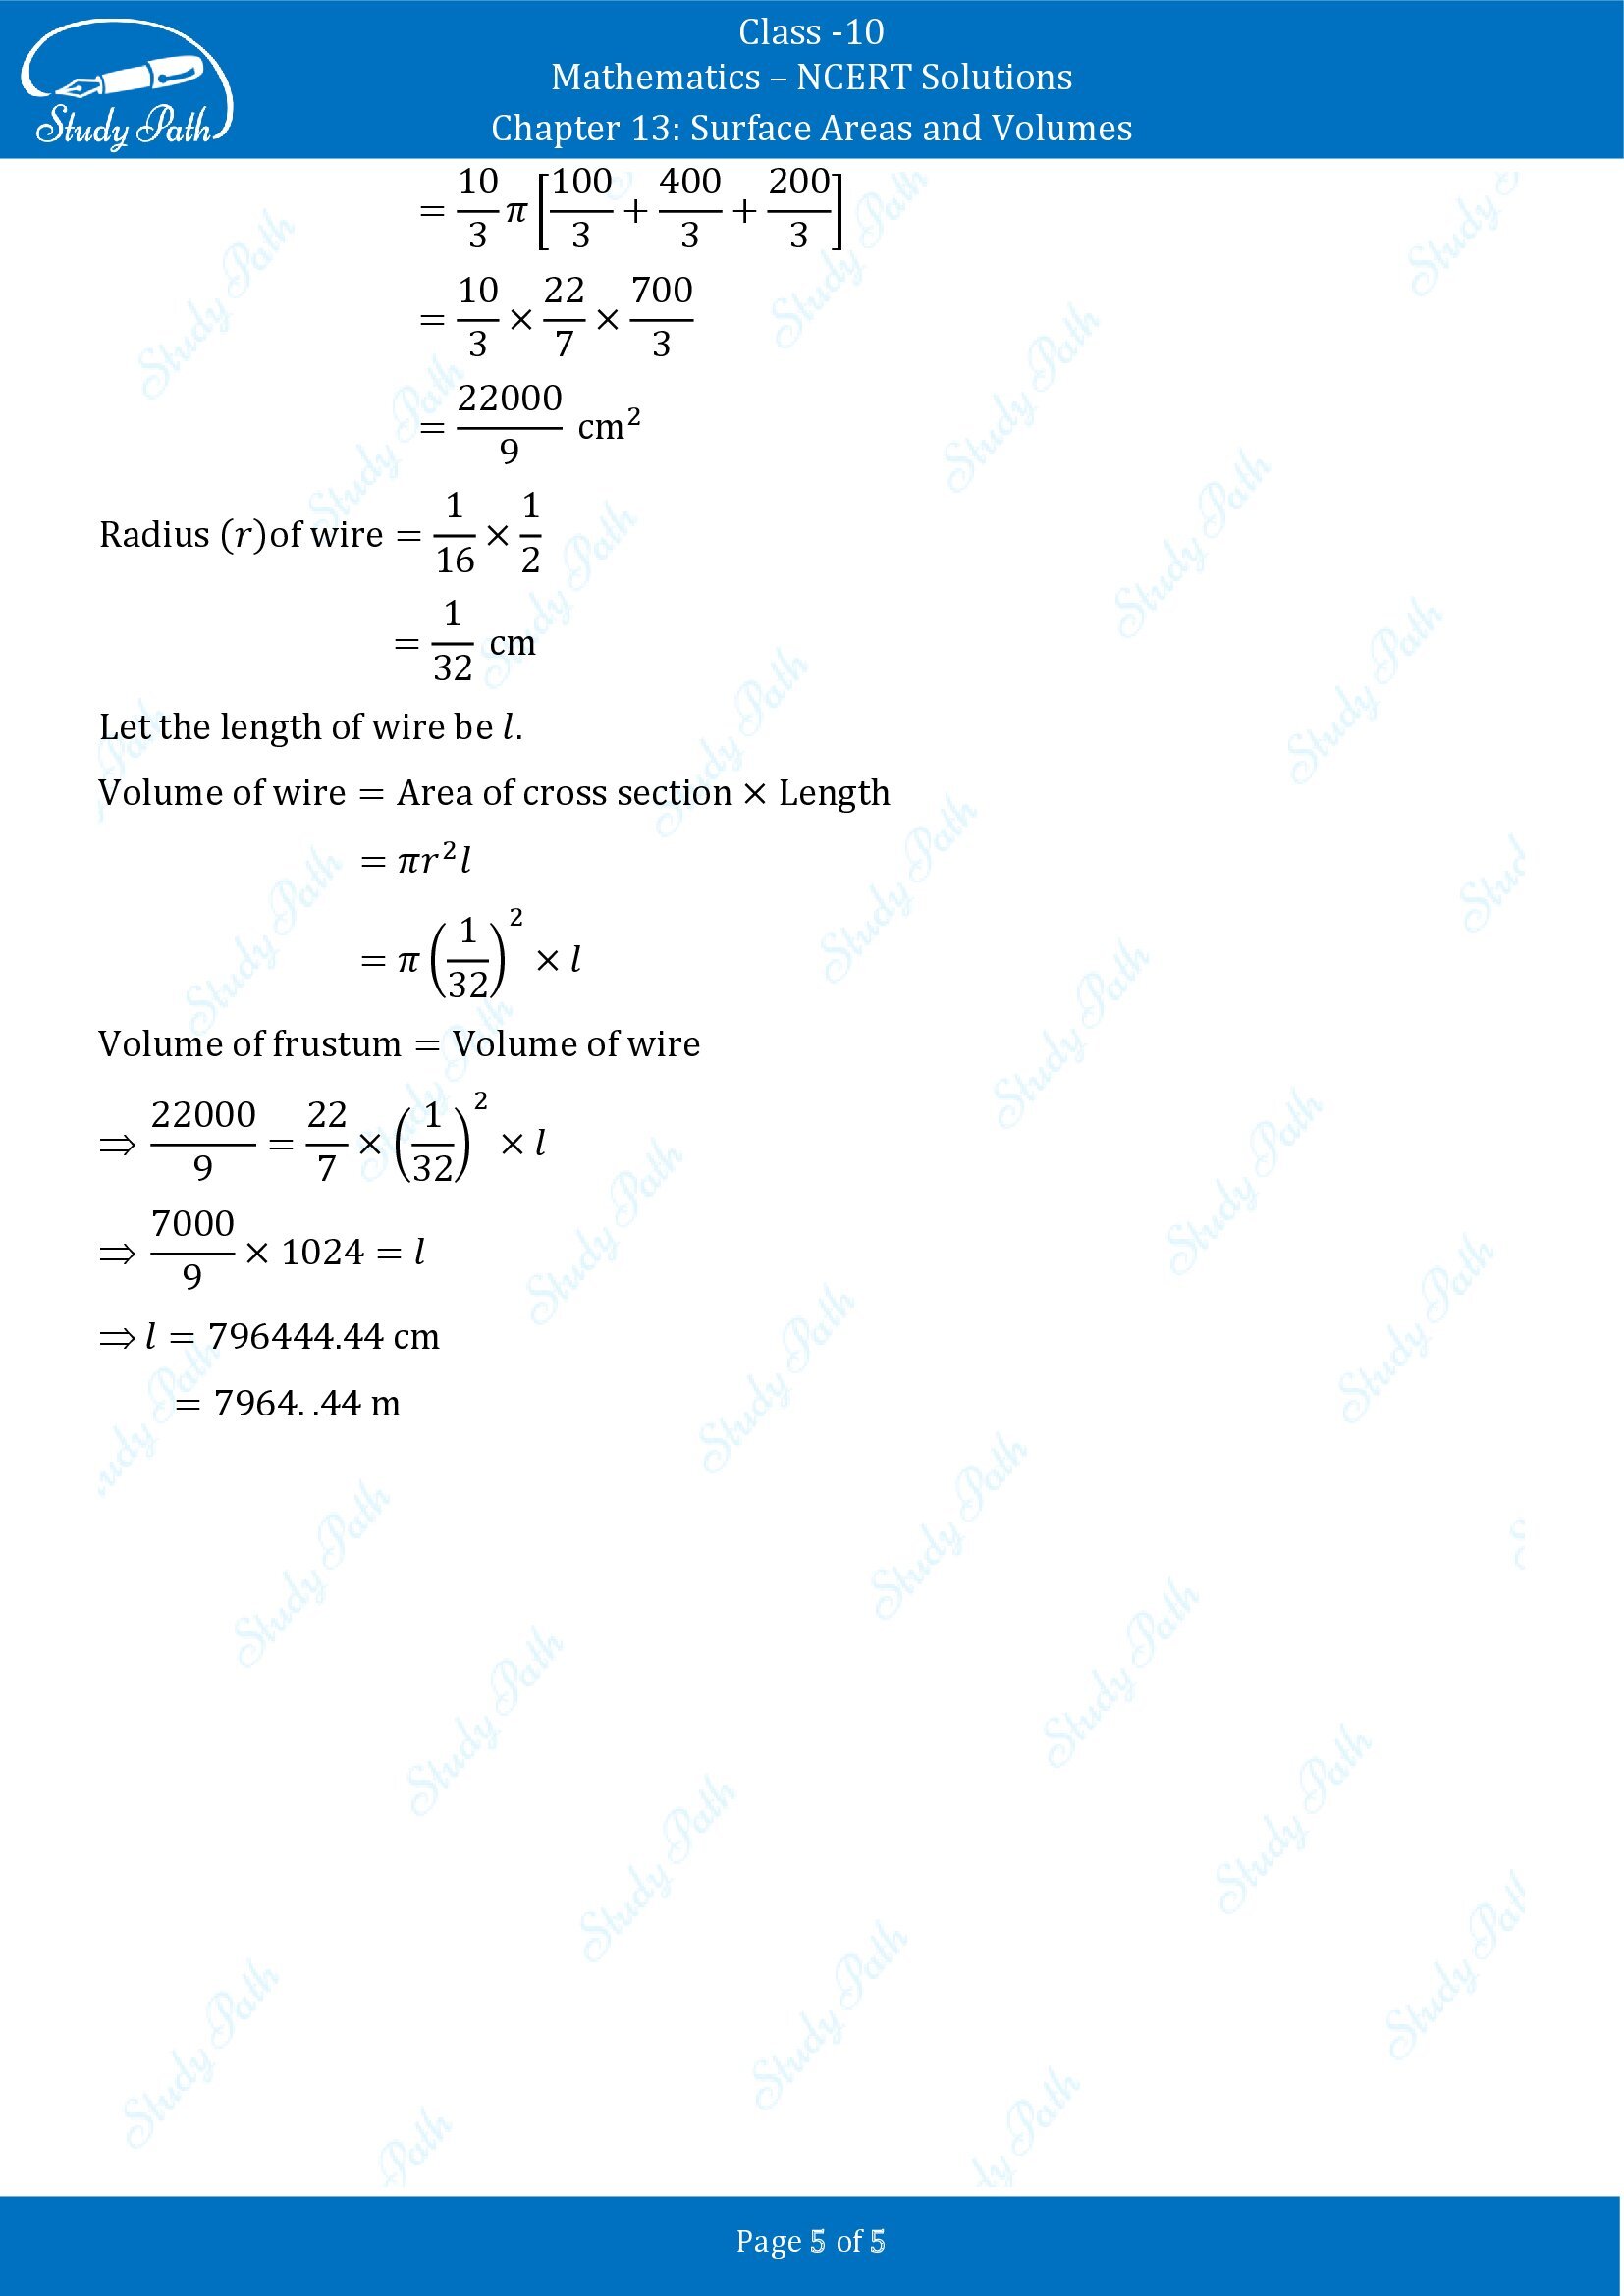 NCERT Solutions for Class 10 Maths Chapter 13 Surface Areas and Volumes Exercise 13.4 00005